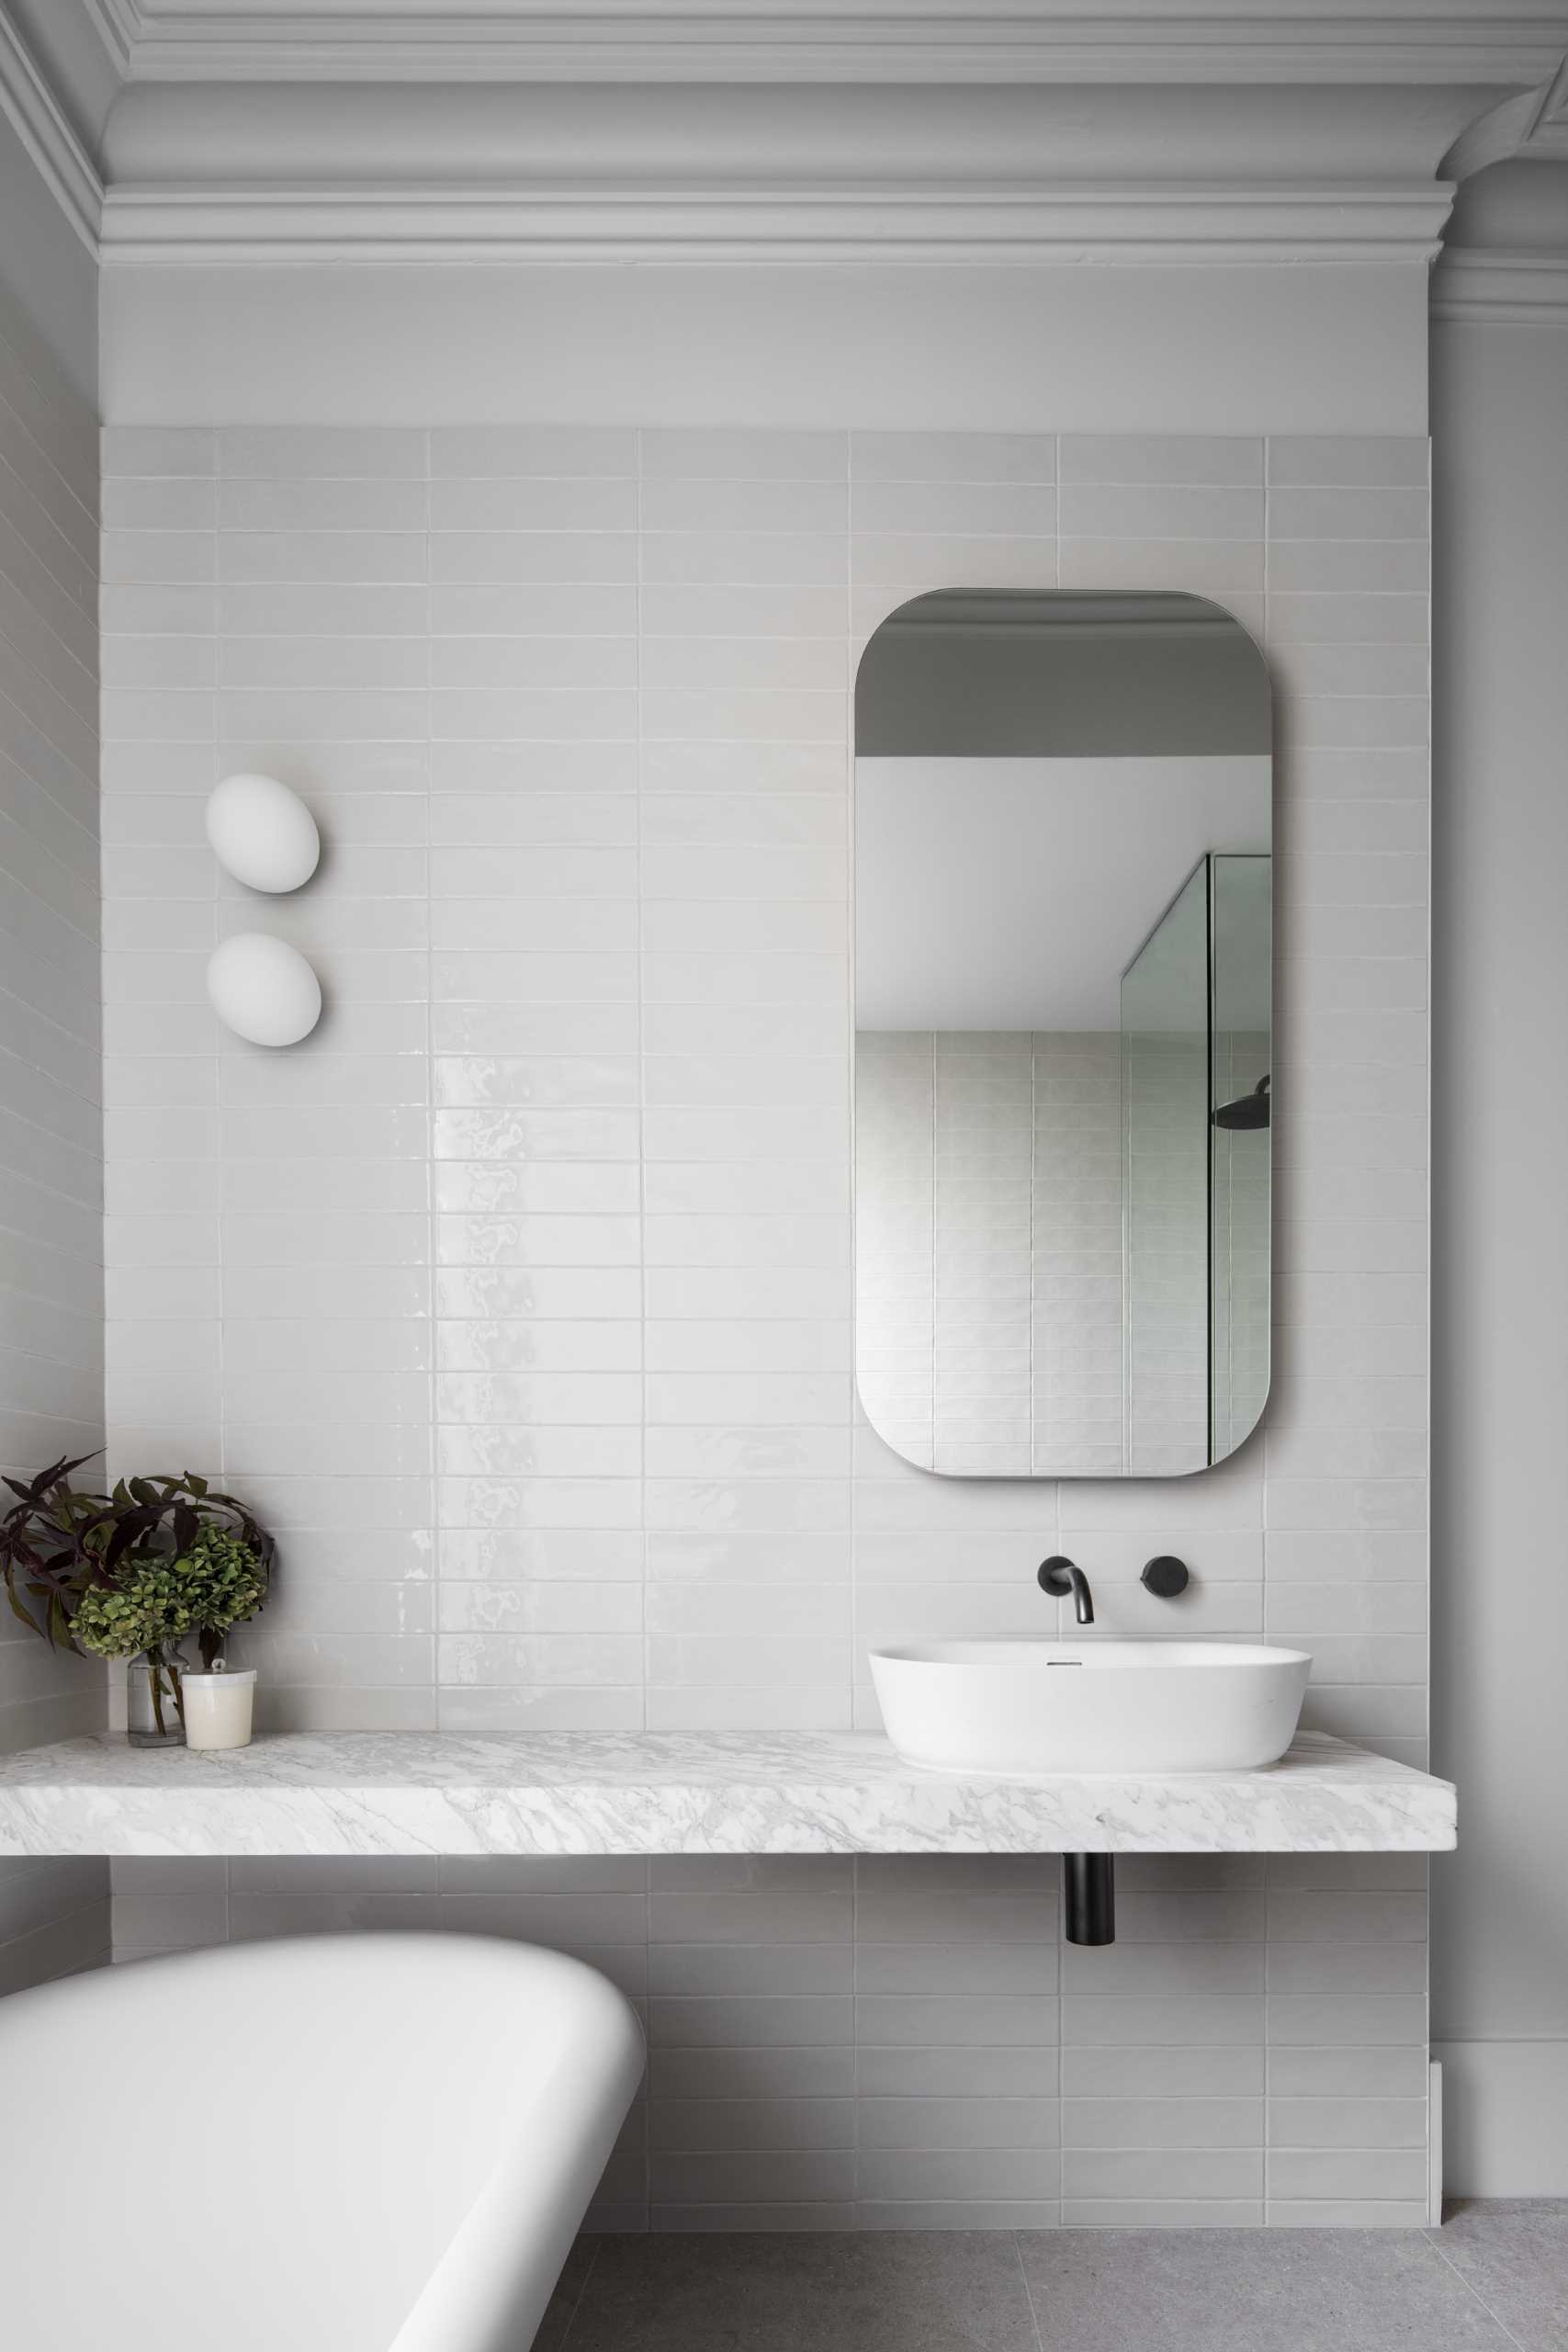 In this bathroom, there's a floating vanity and freestanding bathtub, while an opaque window provides privacy and at the same time, allows the light to filter through.